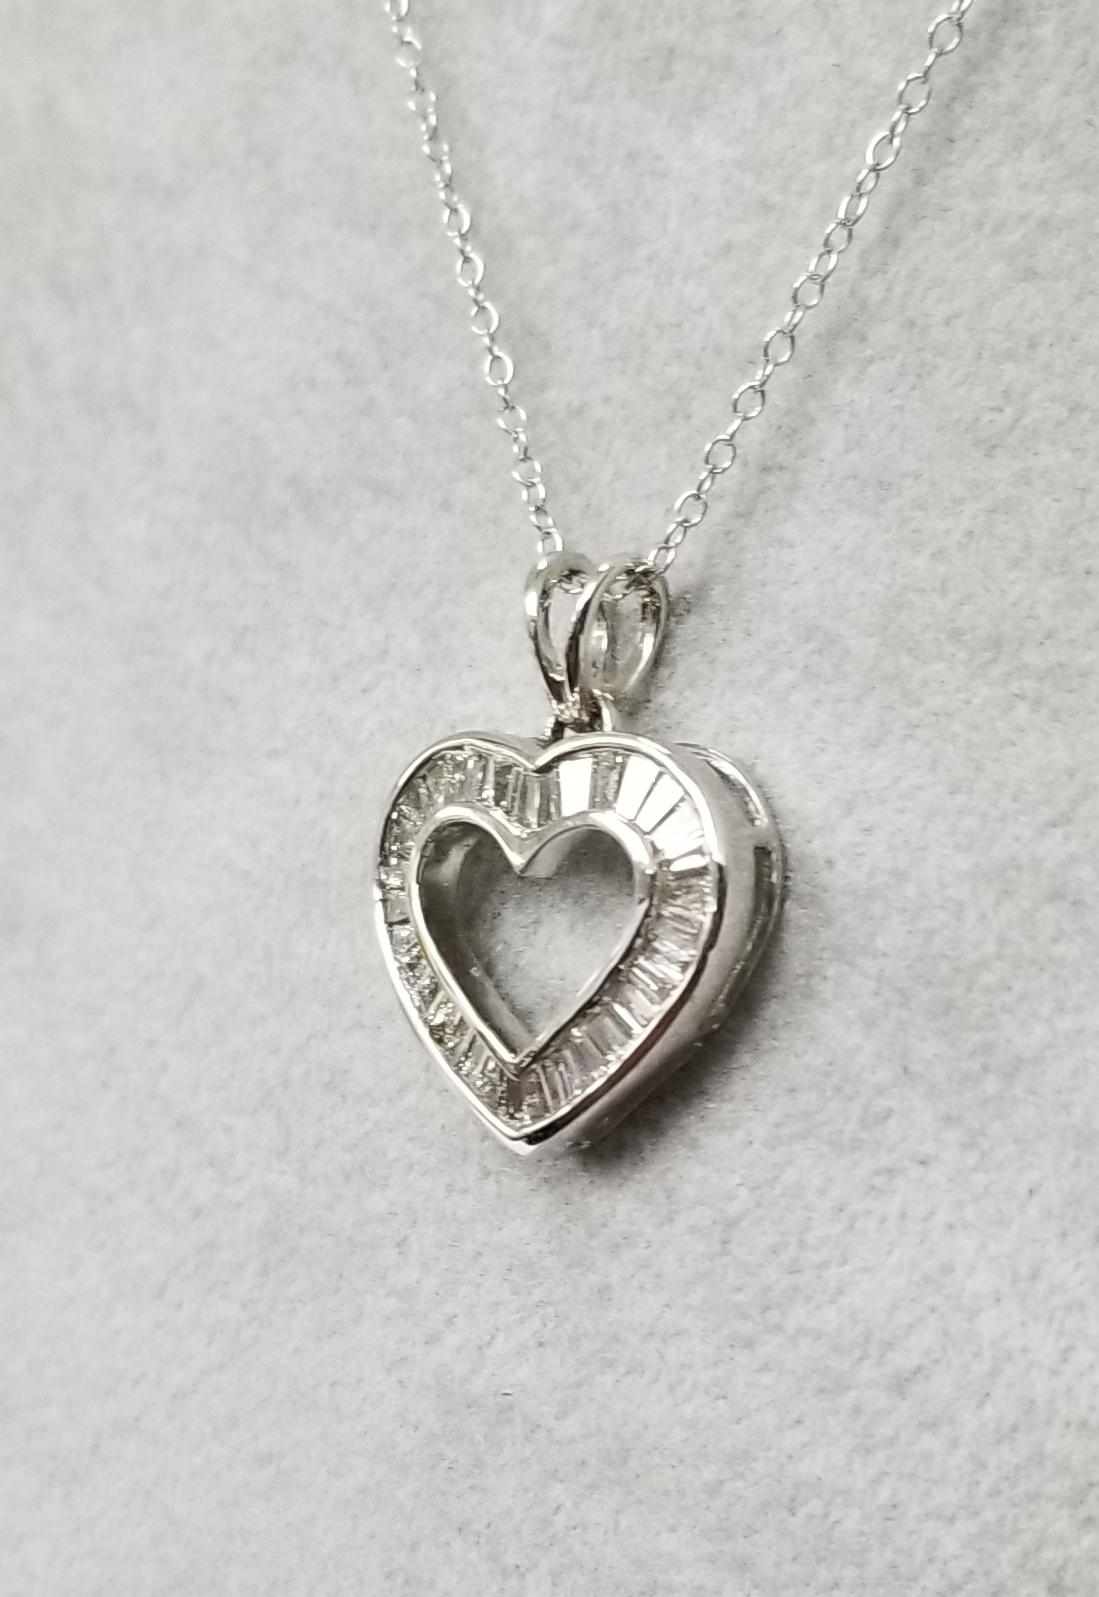 14k white gold diamond heart necklace, containing 35 baguette cut diamonds of very fine quality weighing 1.00cts. on a 16 inch chain.